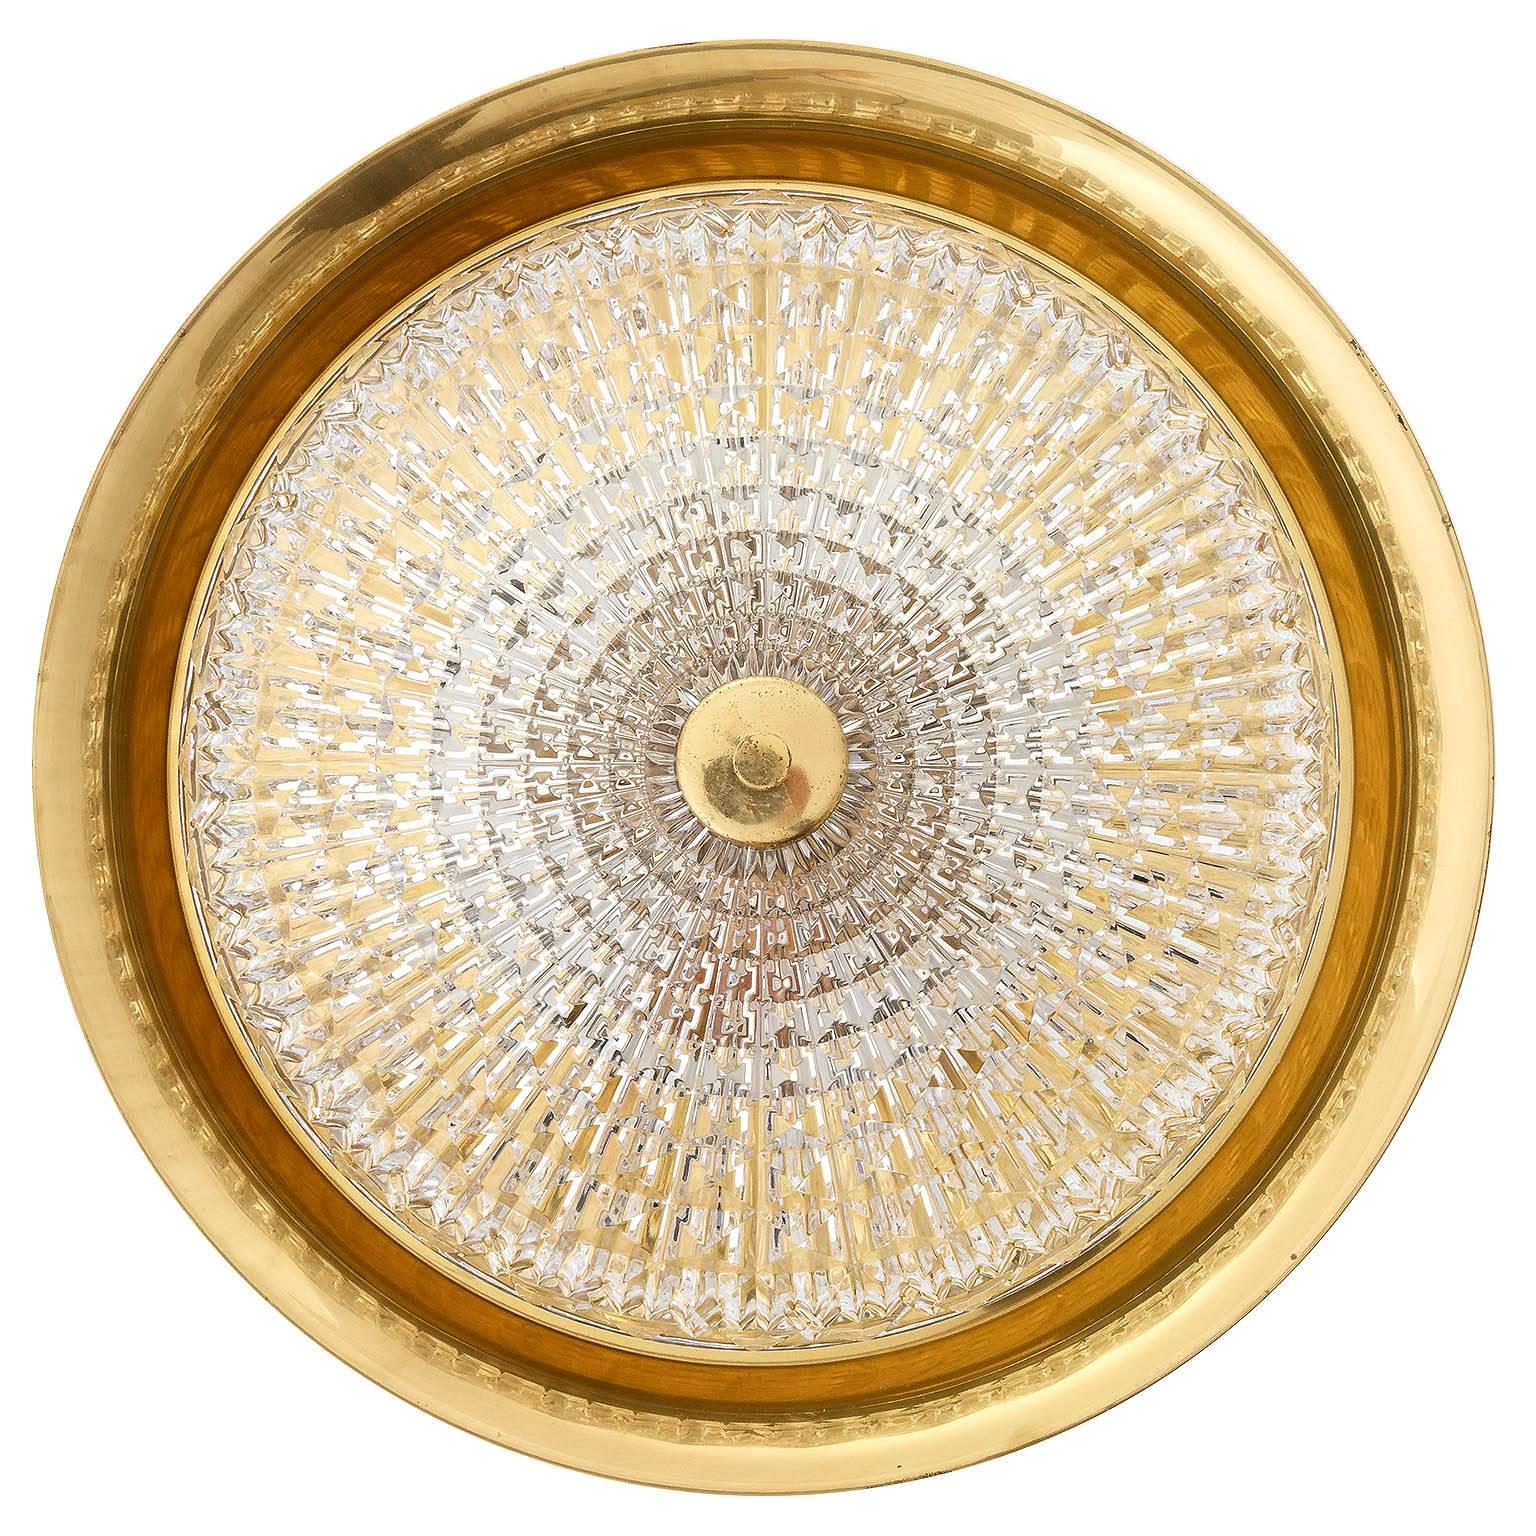 A beautiful Scandinavian Modern brass and textured glass light fixture by Carl Fagerlund for Orrefors/Lyfa, Sweden, manufactured in midcentury, circa 1960. It can be used as wall or ceiling lamp.
The light has five sockets for small screw base